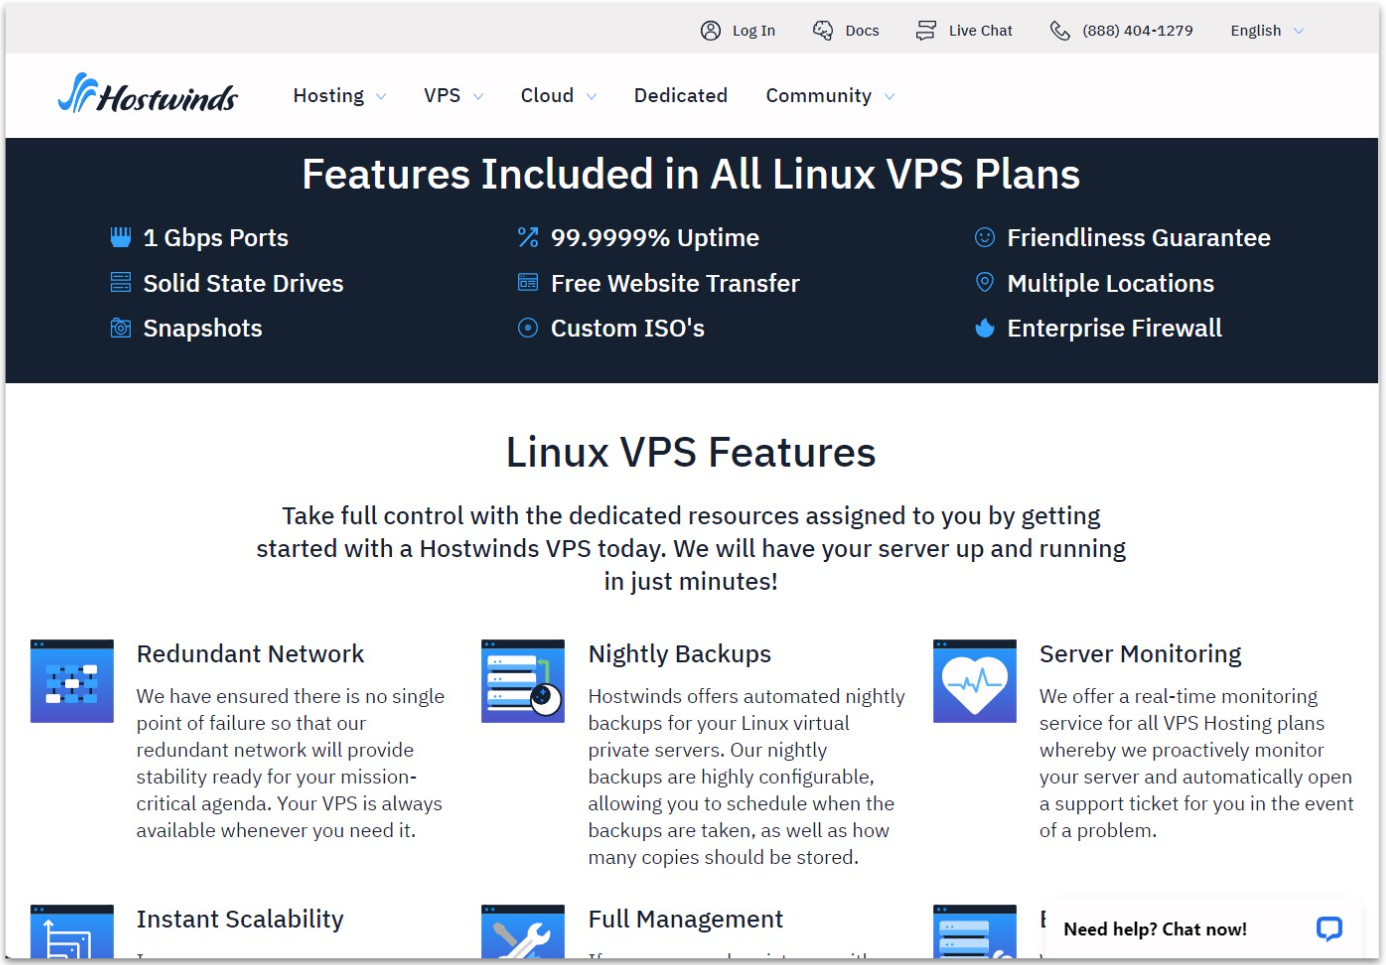 Hostwinds Linux VPS features page